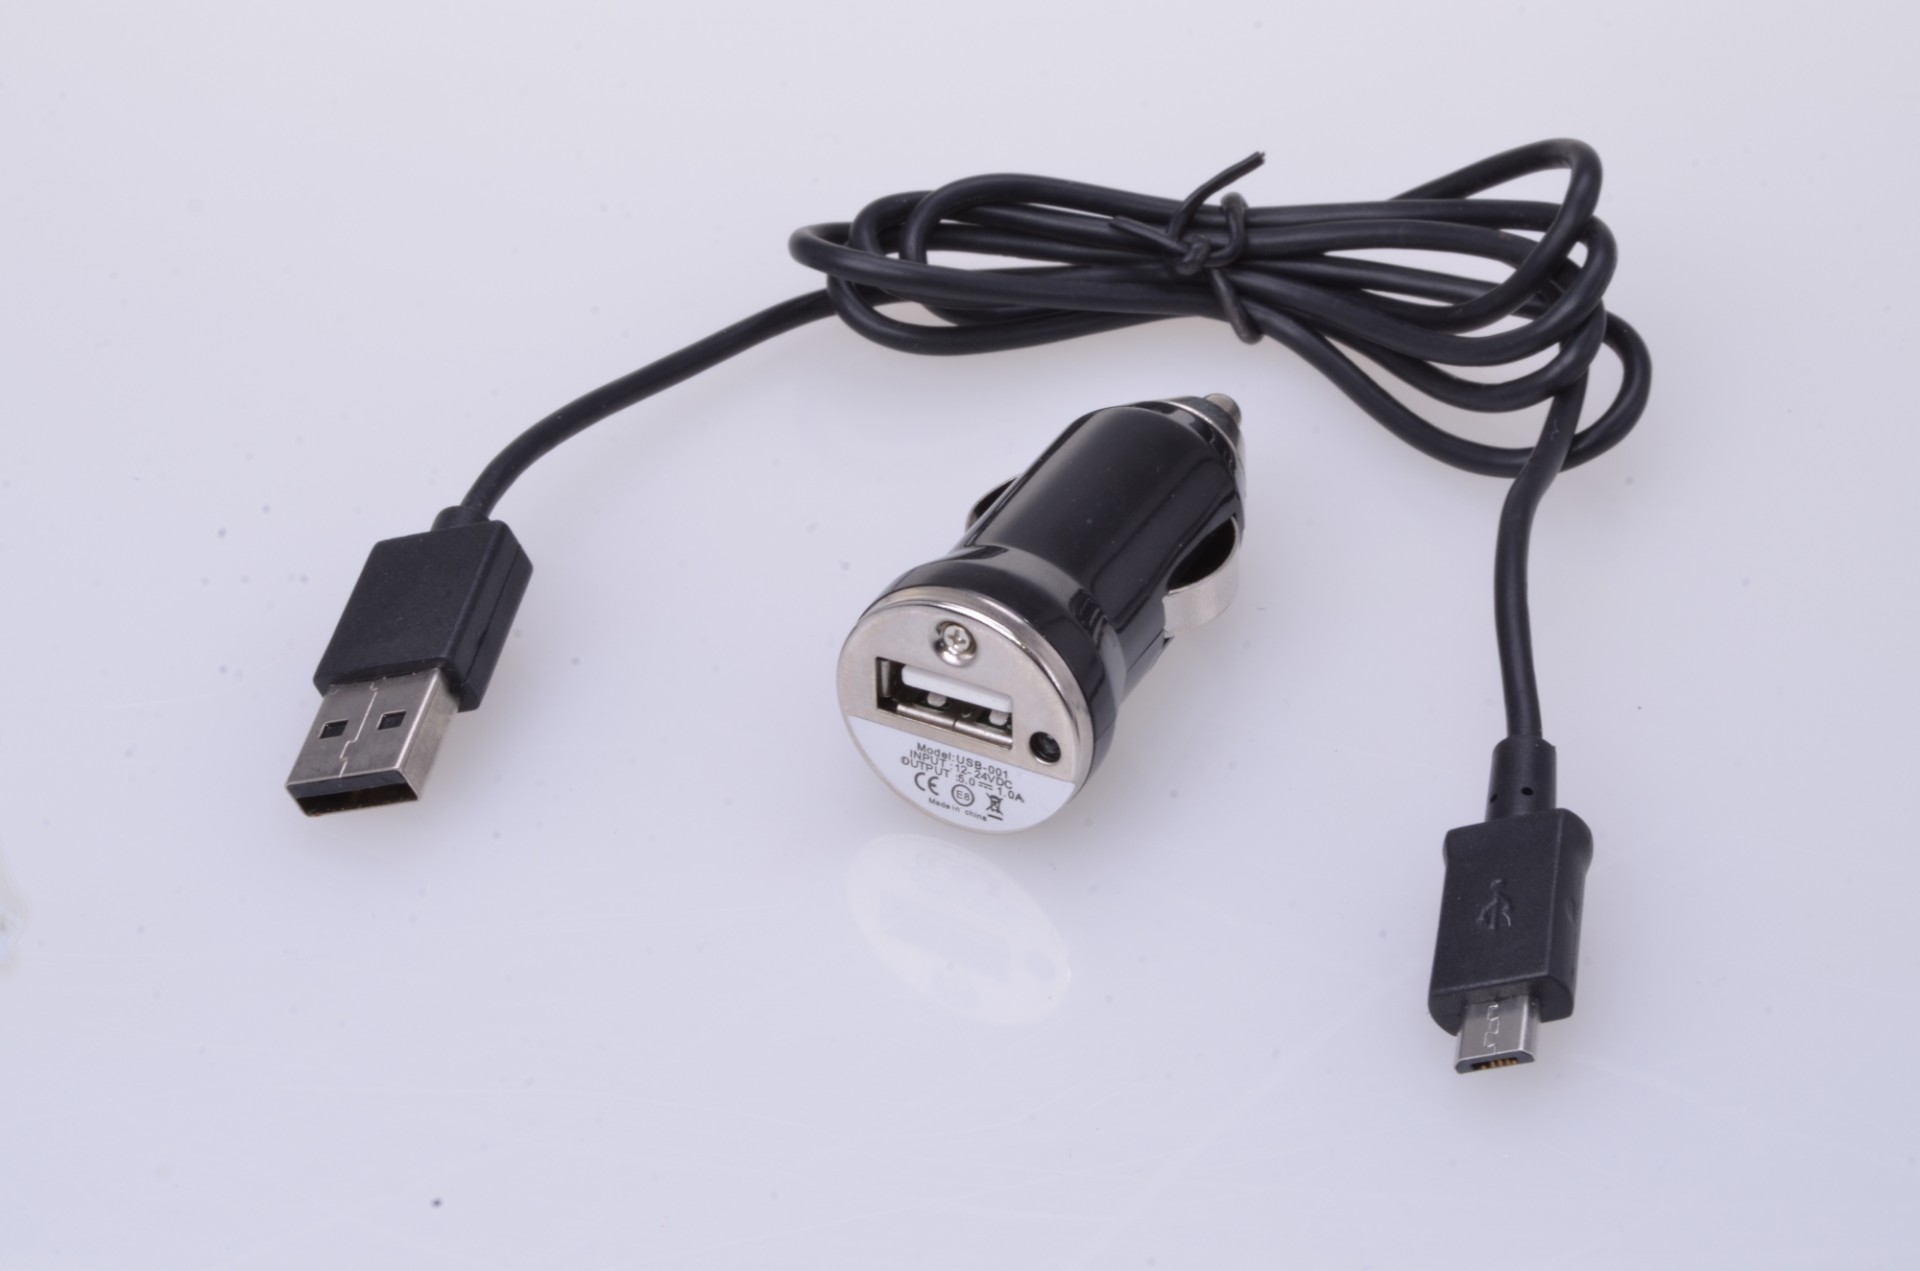 Autosteckdose 12v automotive Outlet Waterproof Charger Adapter USB